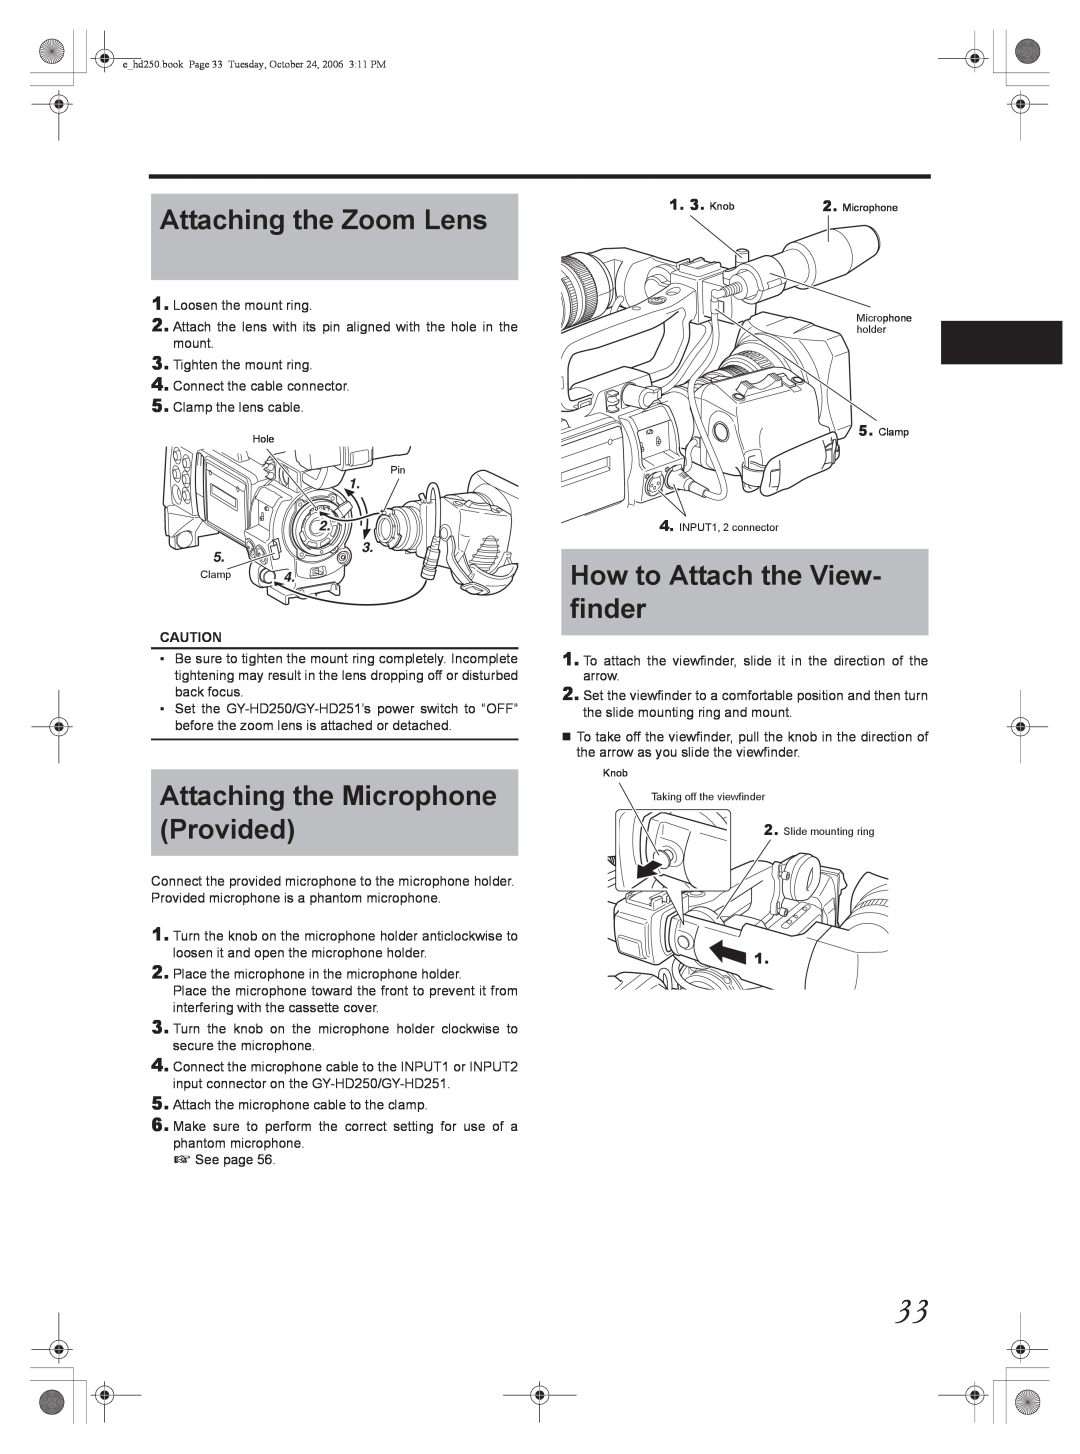 JVC GY-HD251 manual Attaching the Zoom Lens, How to Attach the View- finder, Attaching the Microphone Provided, 1. 3. Knob 